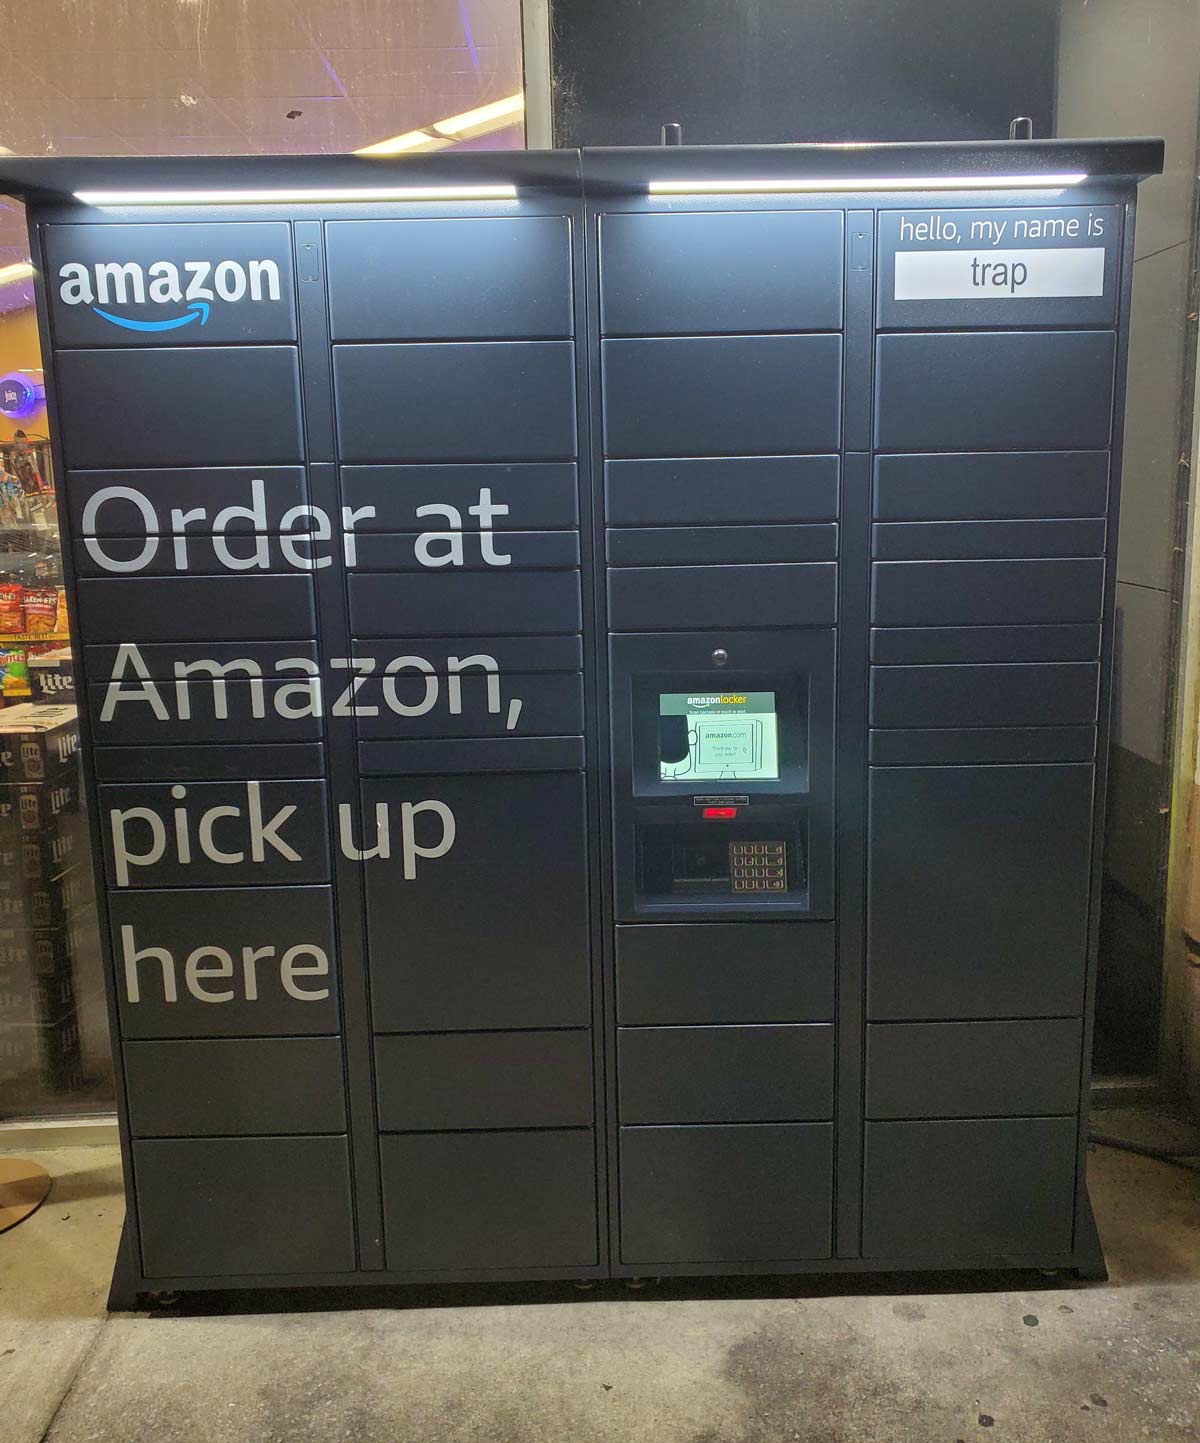 Amazon locker at the local gas station seems sketchy